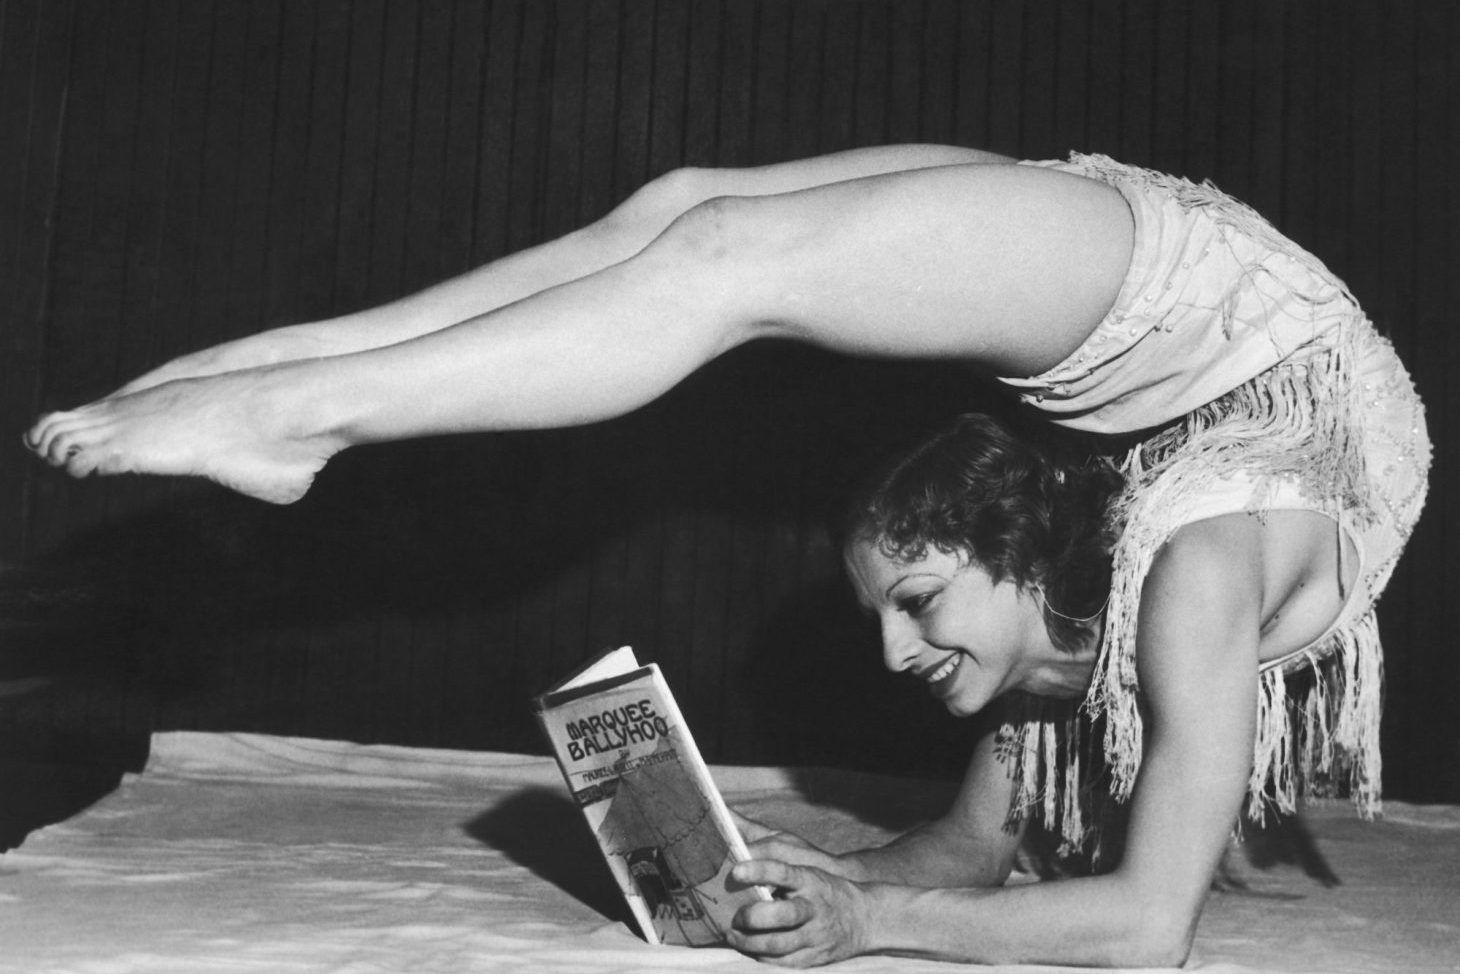 Dancer Gertrude Fisher laying with her legs bent over her head to read her husbands latest novel 'Marquee Ballyhoo', 1932.